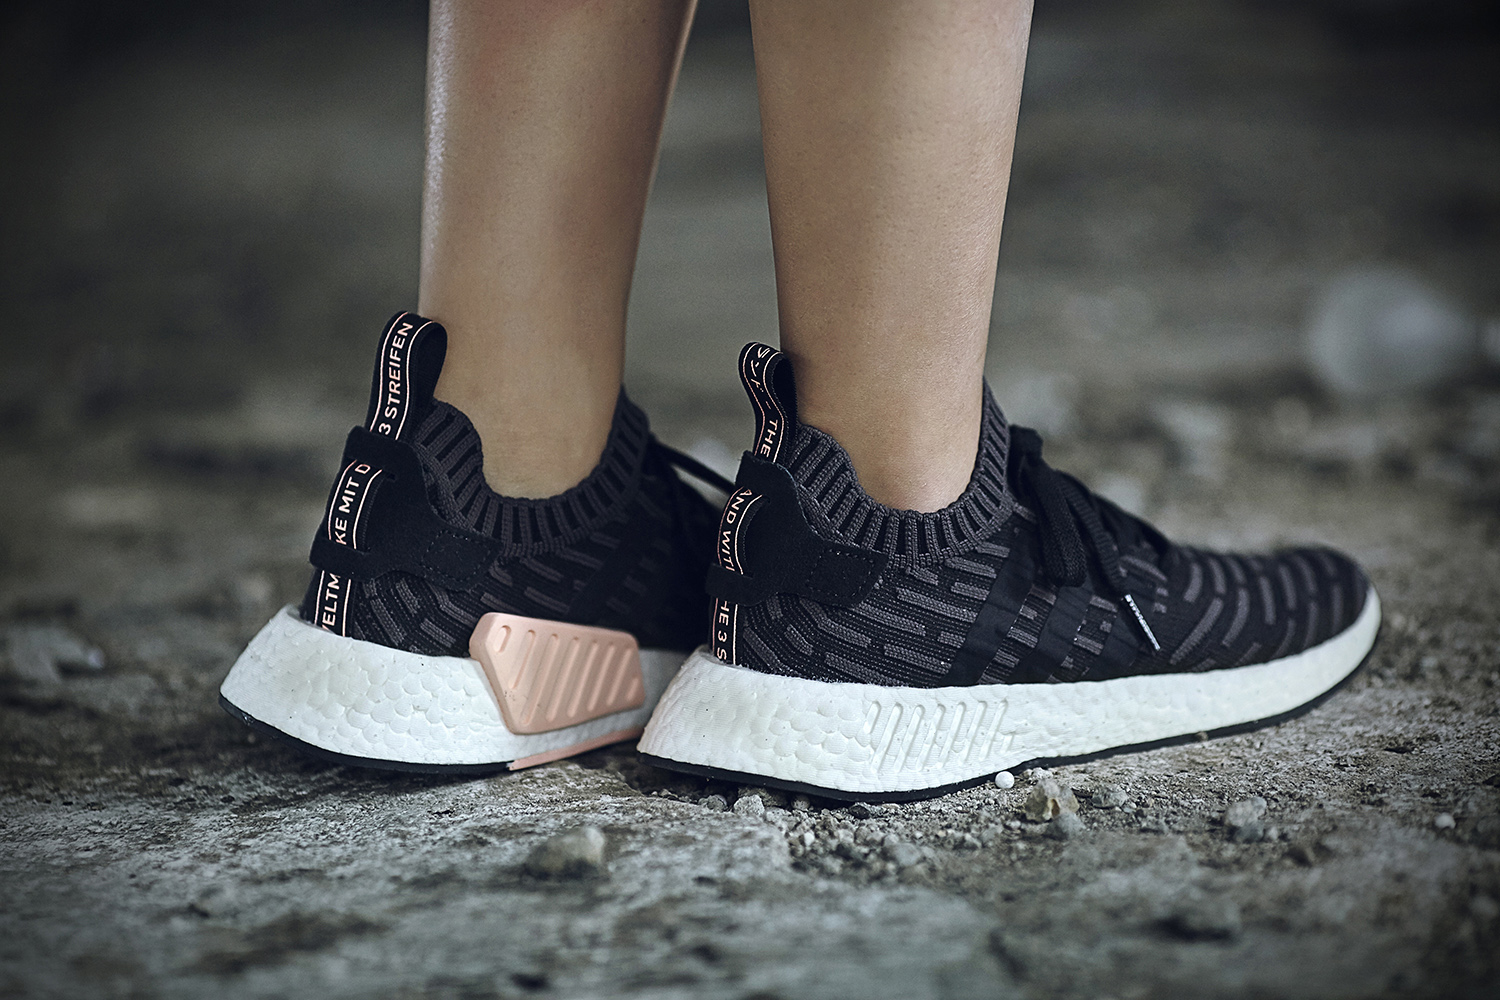 adidas-originals-nmd_r2-ntd6800_%e5%a5%b3%e6%80%a7%e9%9e%8b%e6%ac%be-2